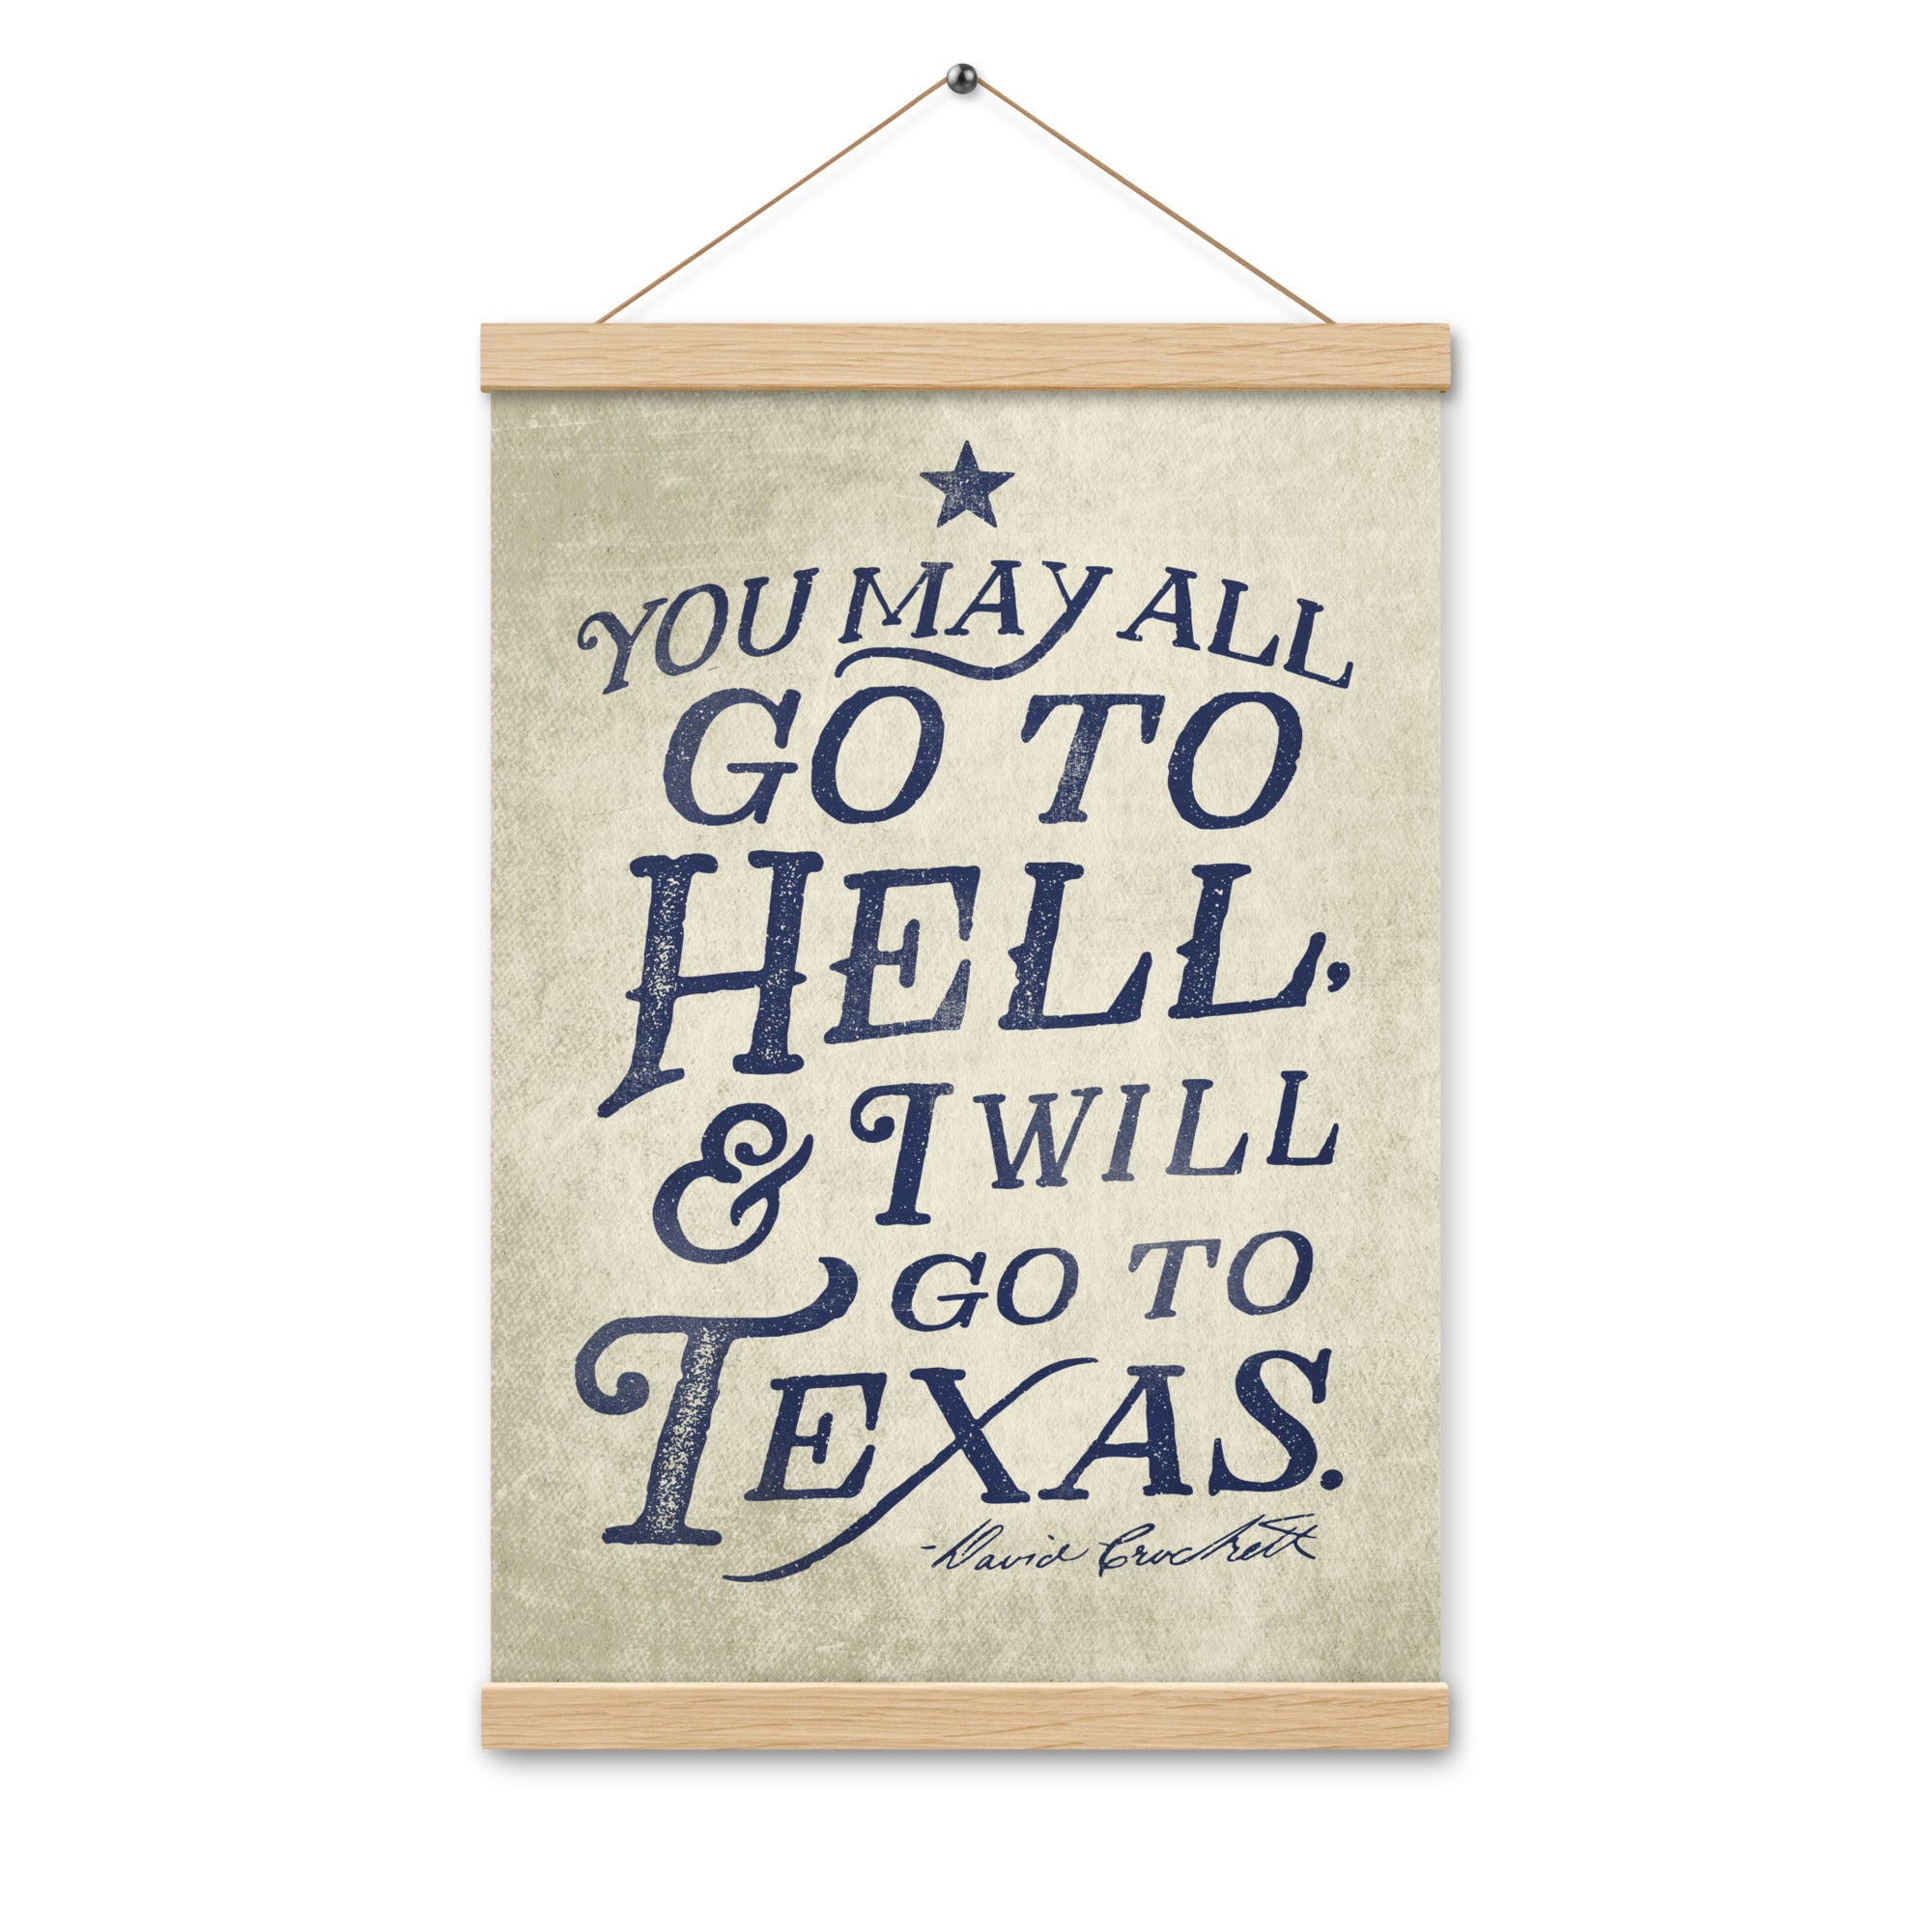 I Will Go To Texas Davy Crockett Quote Poster with hangers